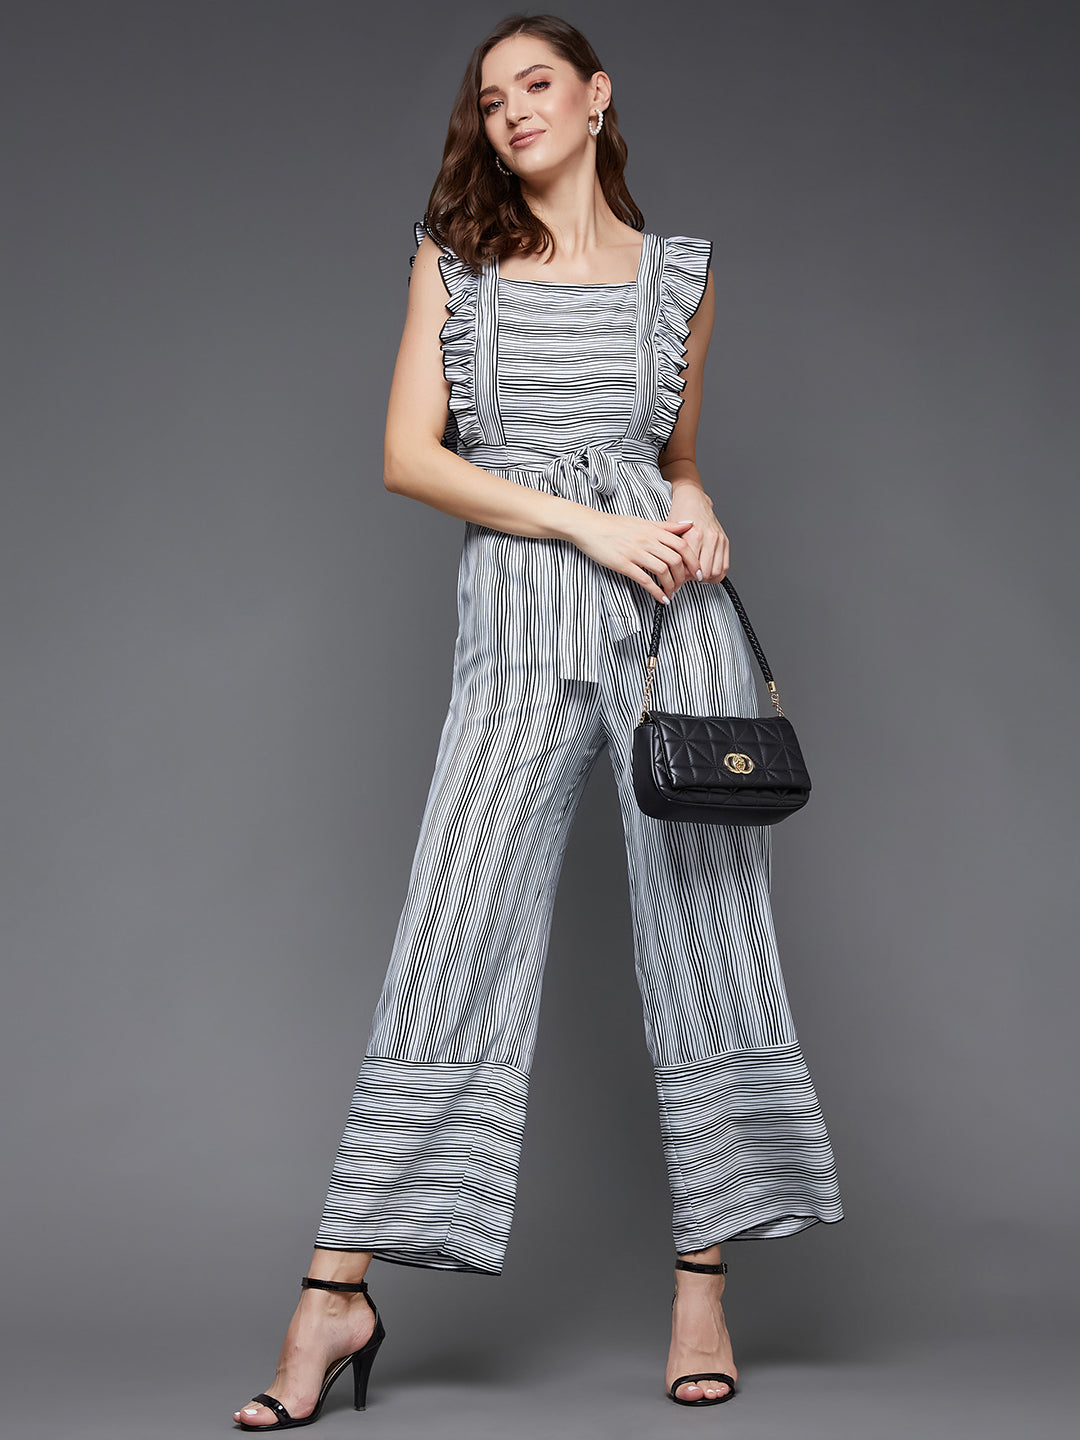 Women's Black and White Striped Square Neck Frilled Crepe Relaxed Fit Tie-Up Regular Jumpsuit